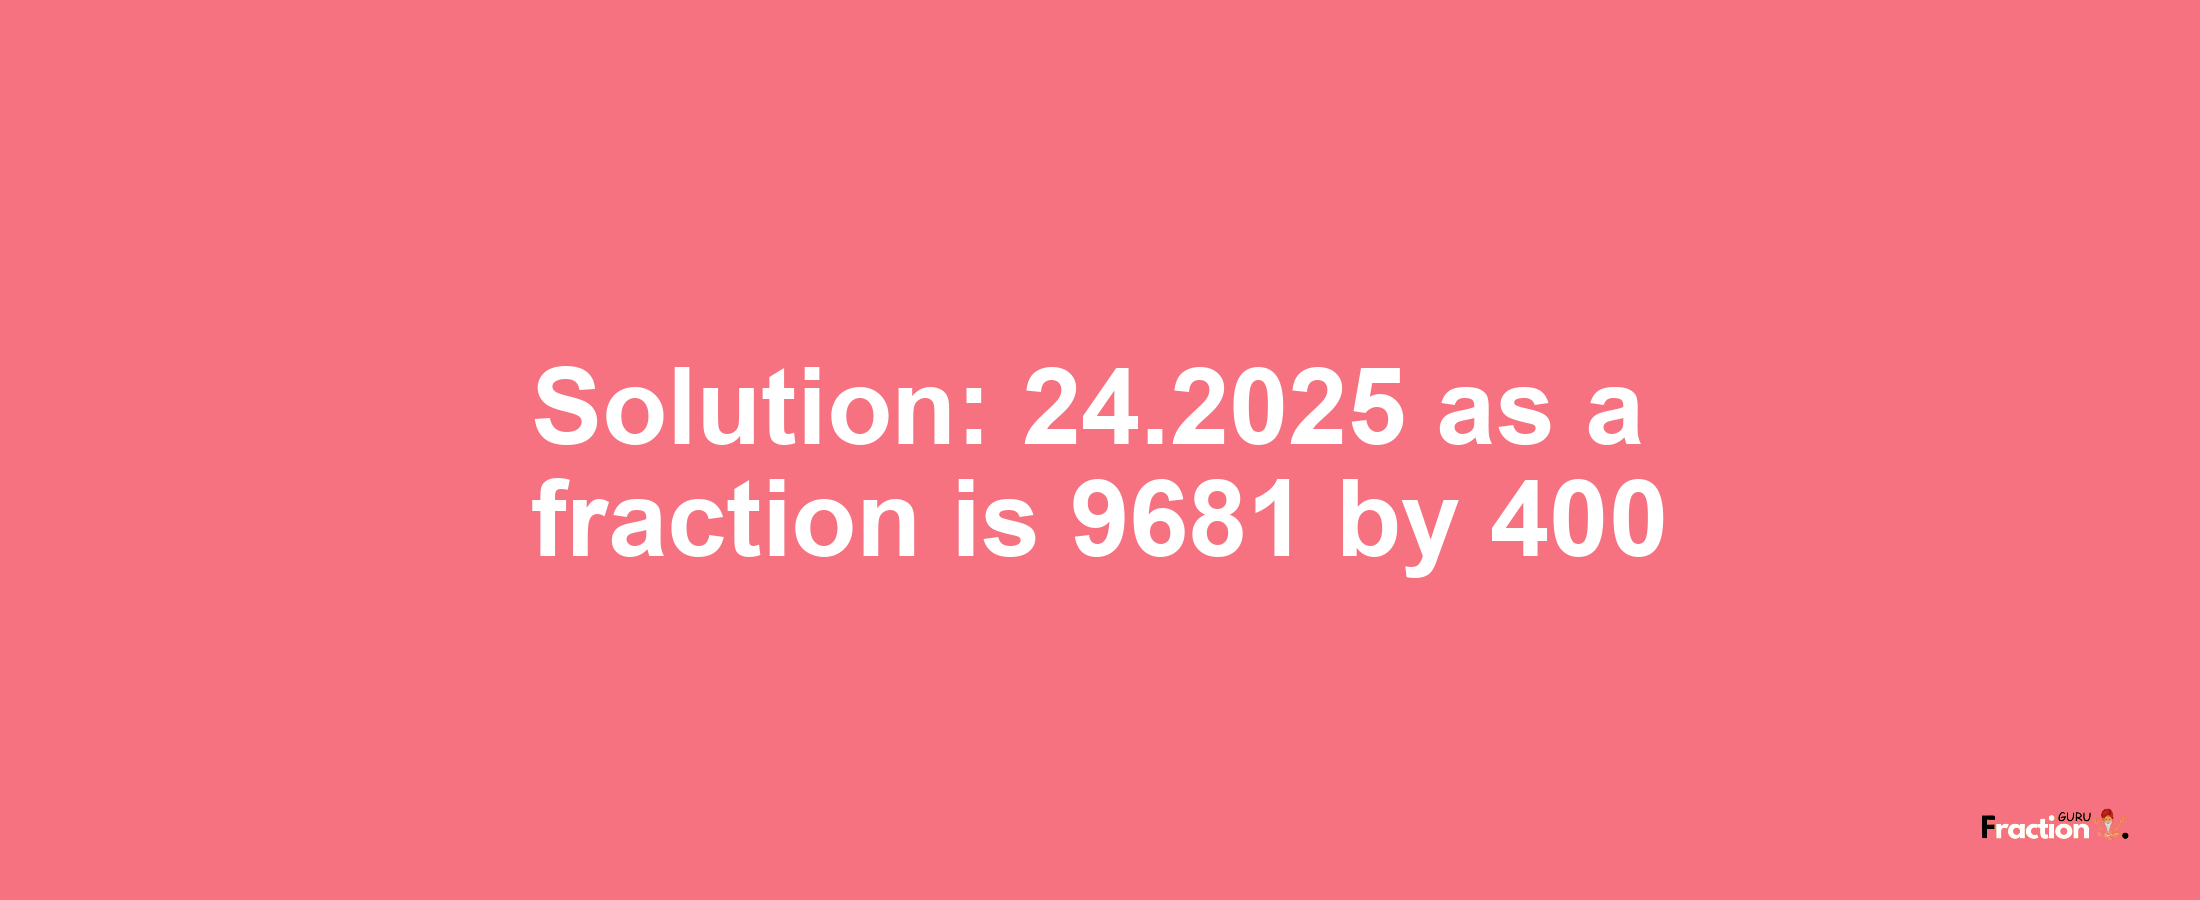 Solution:24.2025 as a fraction is 9681/400